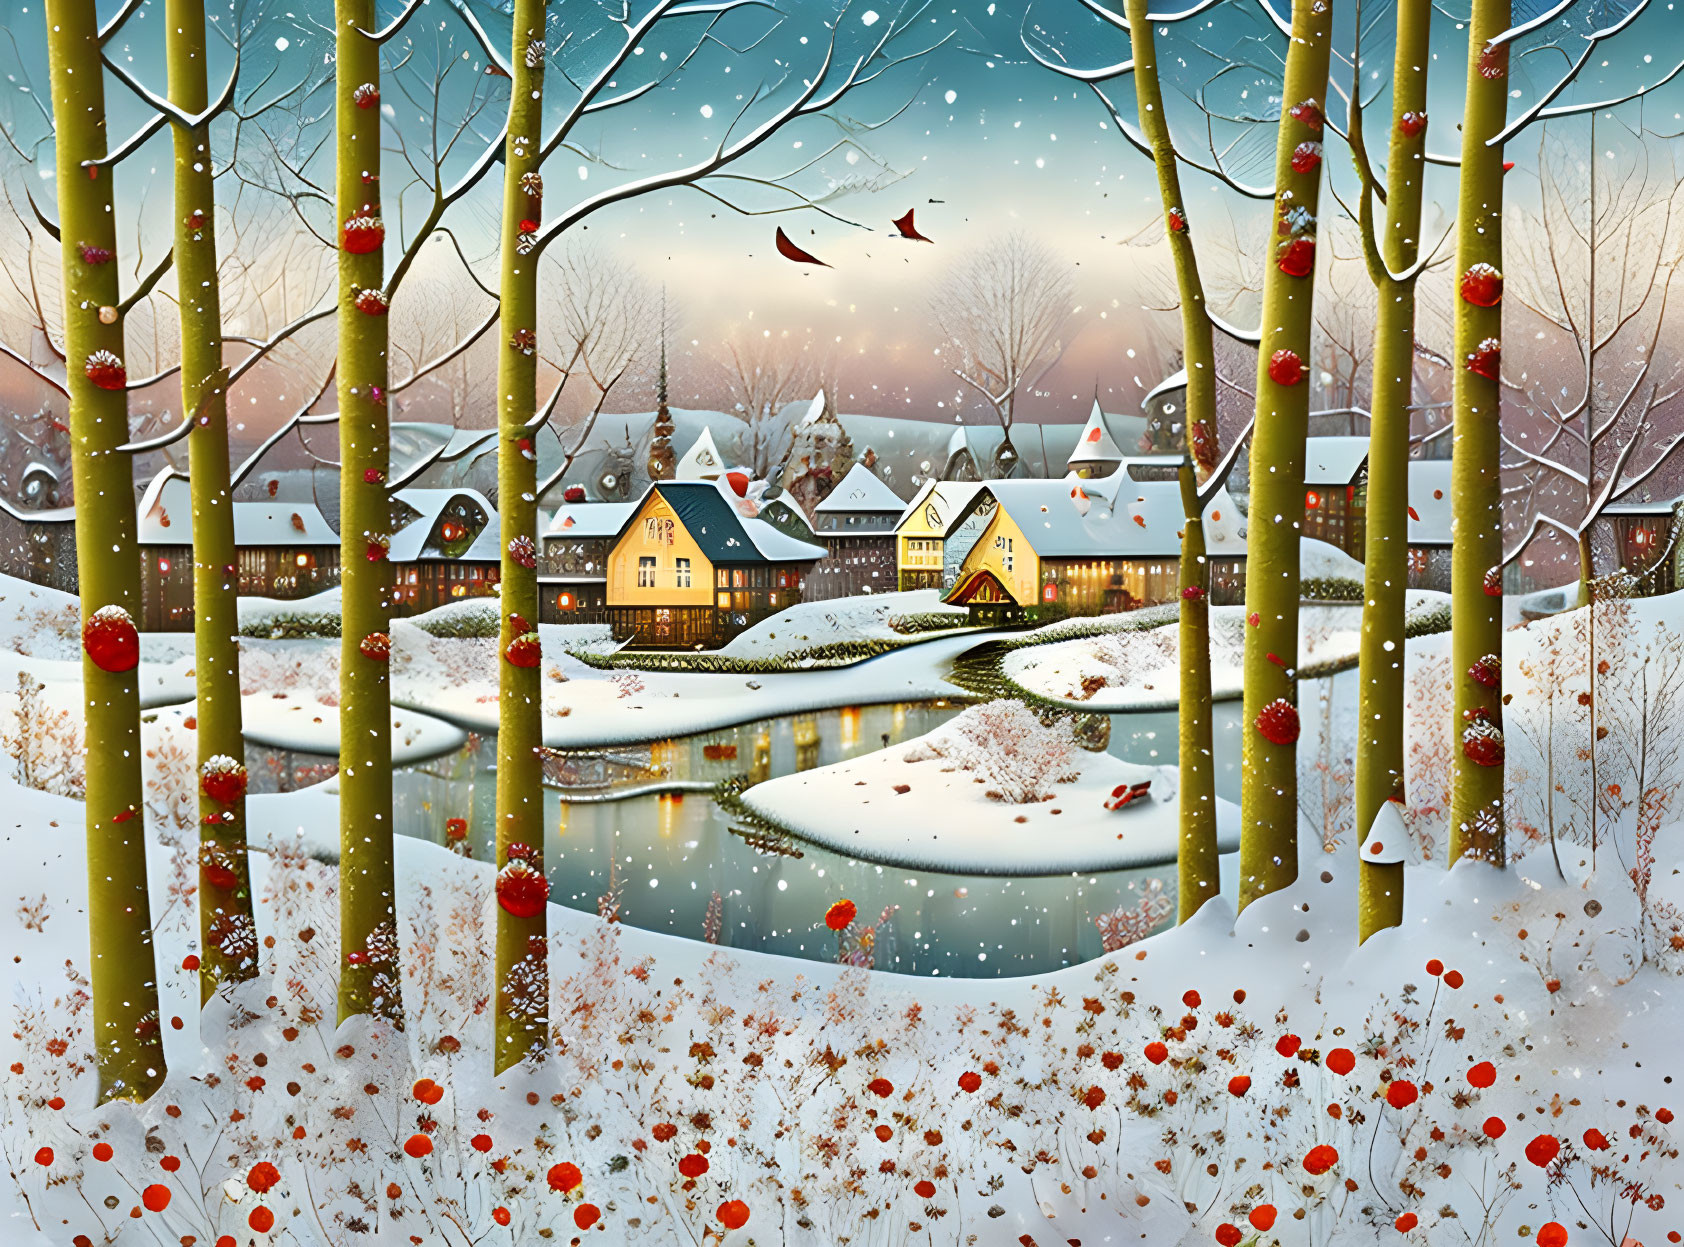 Snow-covered trees, river, berries, and birds in twilight winter scene